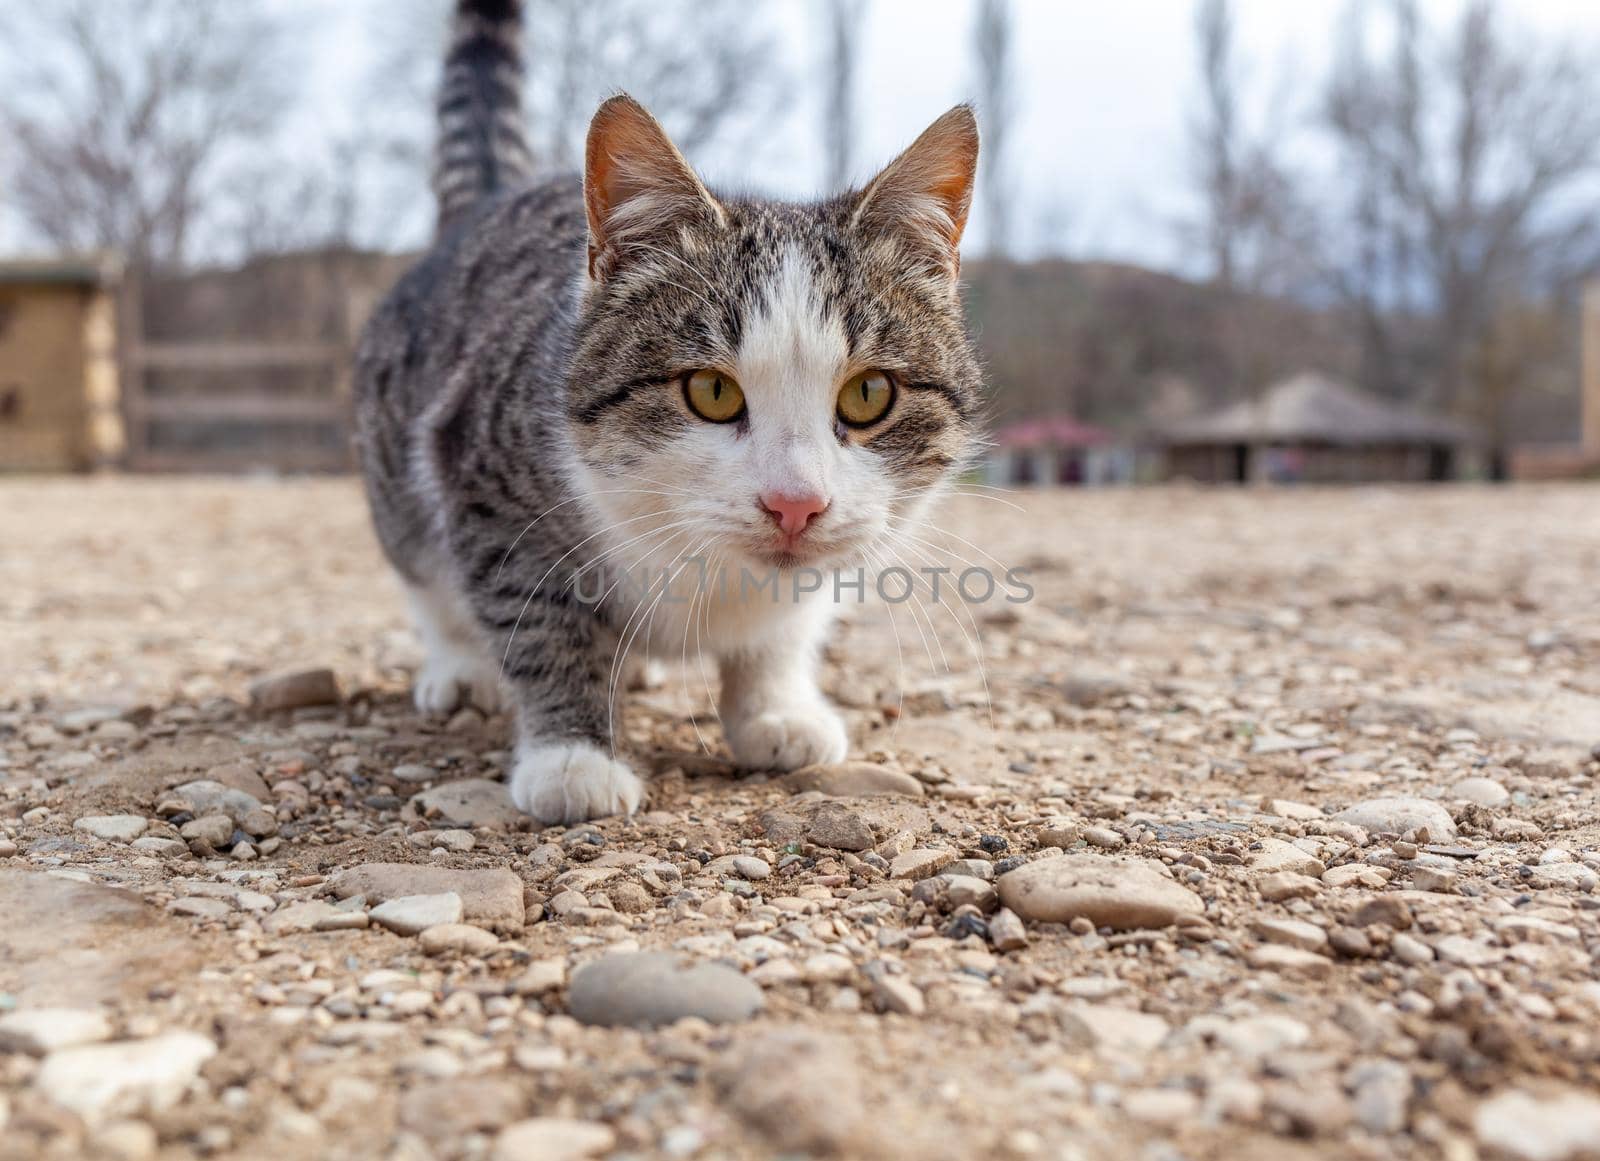 A beautiful striped street cat in the countryside. The cat is walking and looking at the camera